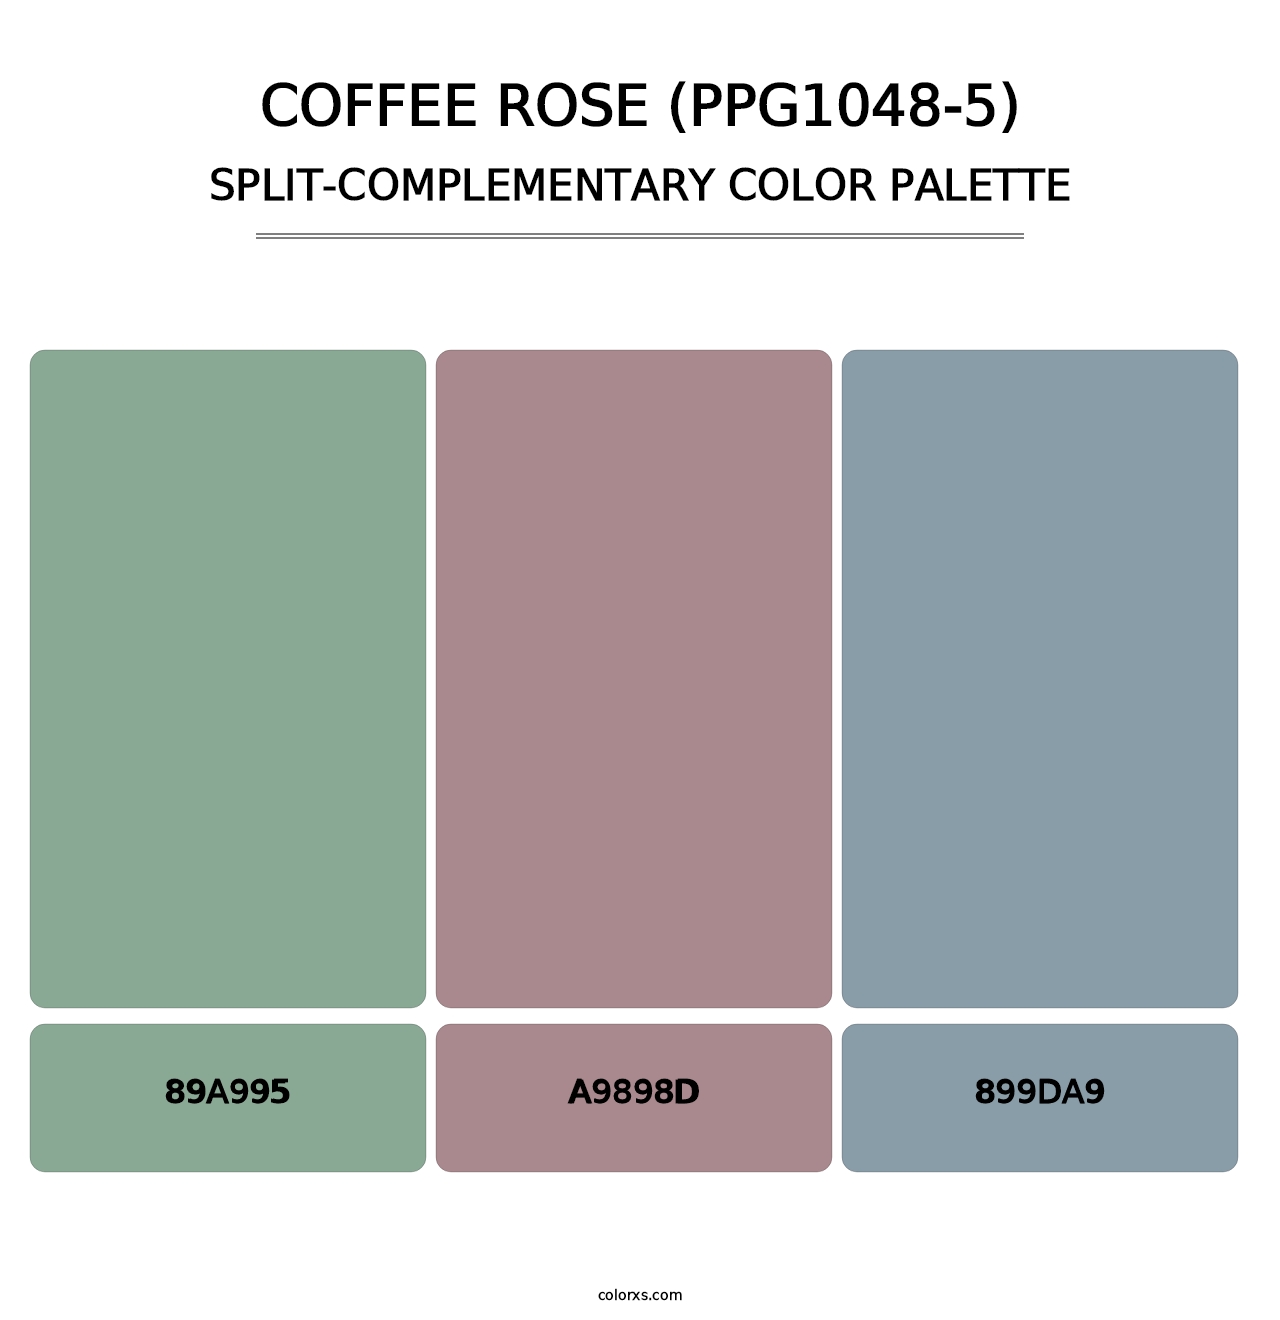 Coffee Rose (PPG1048-5) - Split-Complementary Color Palette